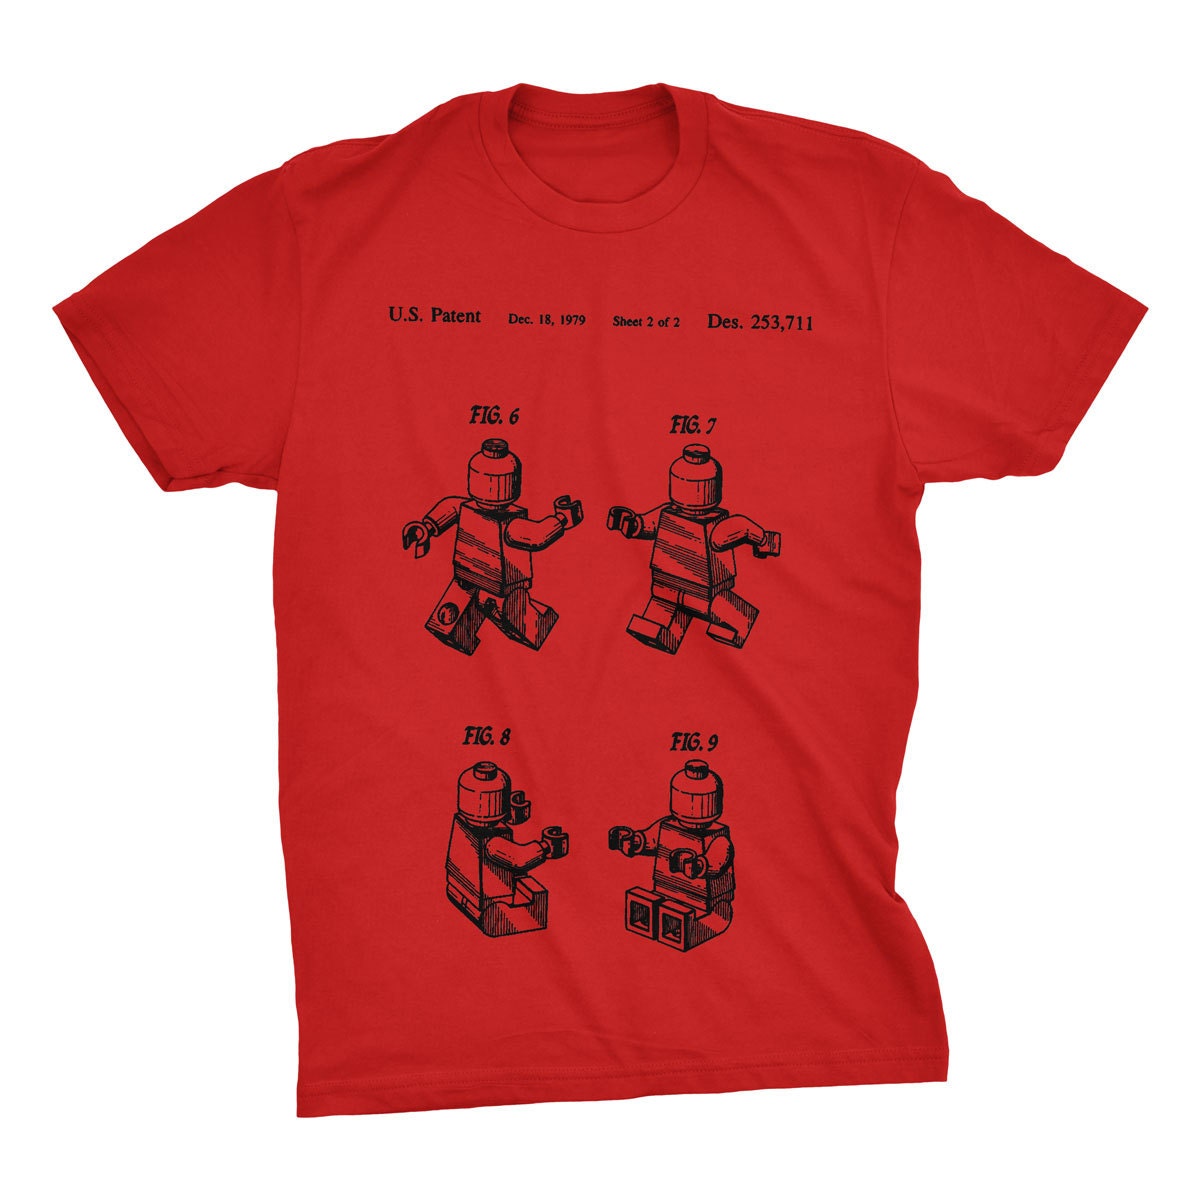 Lego Man Patent T-shirt. Lego Patent. Lego Blueprint. Soft Ringspun Cotton  Tee Sizes S-3X. Available in Black, White, Red, or Gray. - Etsy